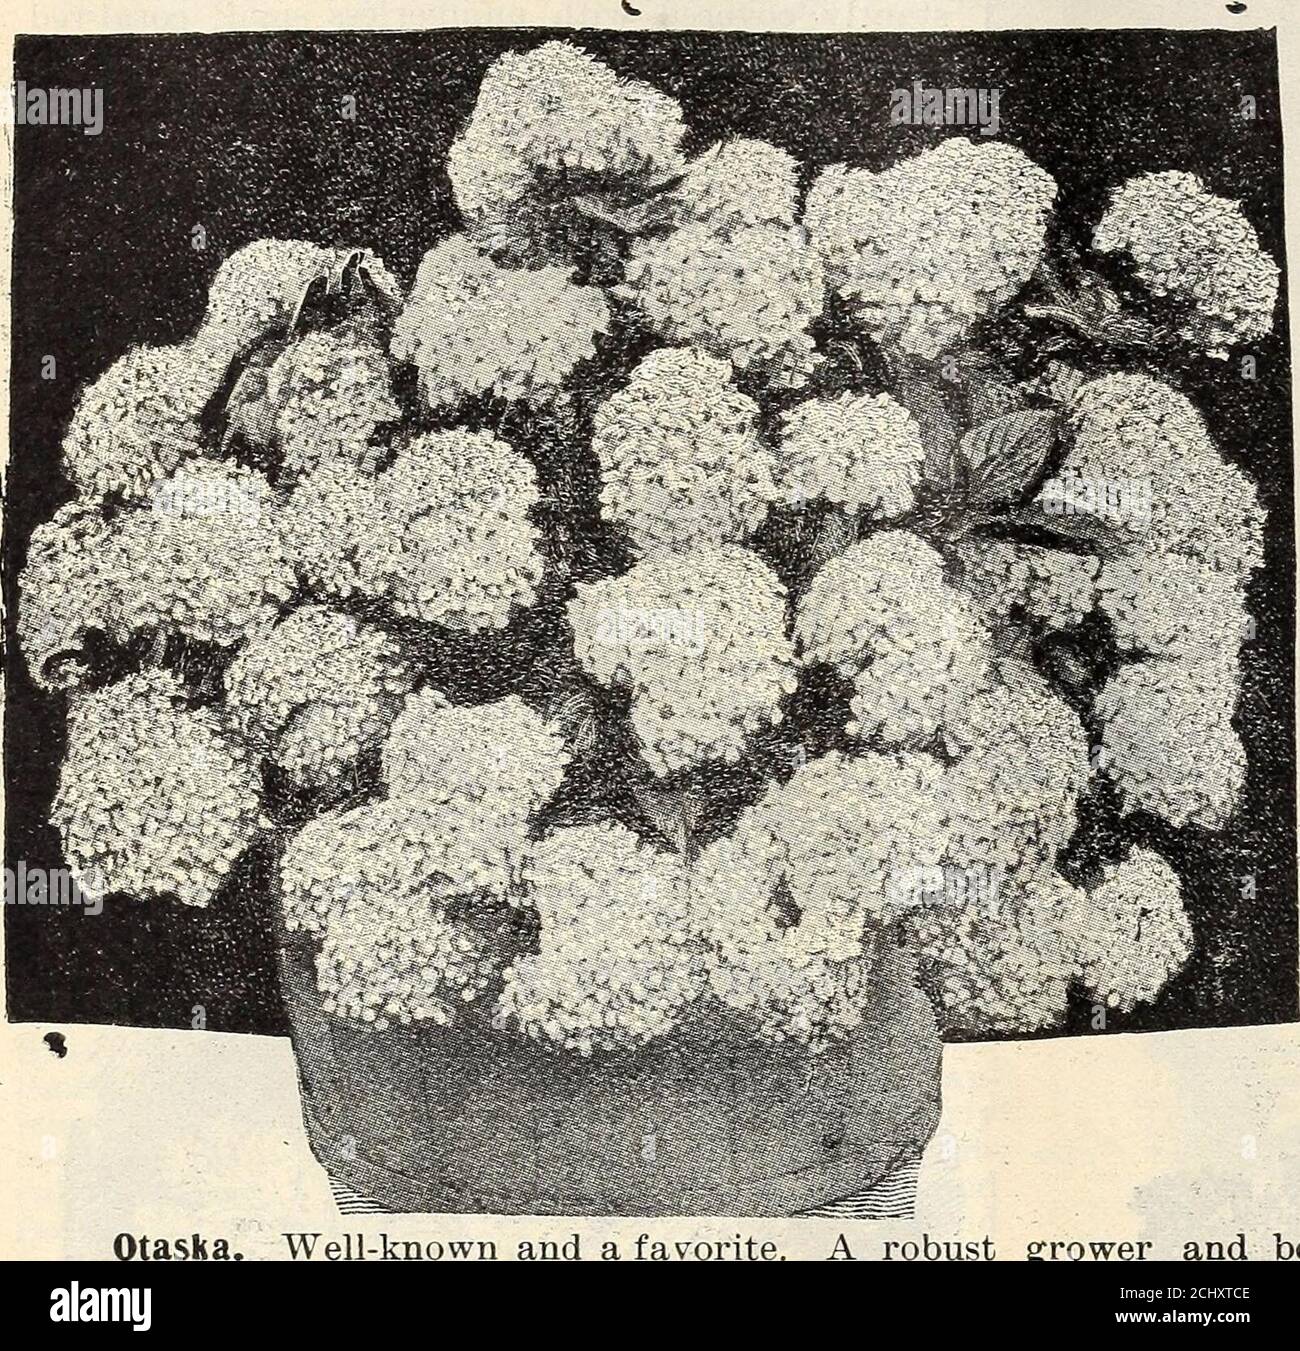 . Lovett's special catalogue of roses geraniums cannas palms carnations, chrysanthemums gladiolus, lilies, hardy herbaceous plants, and other summer flowering plants and bulbs . 48 / T. loVett, Little silver an.d., rei&gt; sank, n. j.SUPERIOR MIXED GLADIOLUS. I^IOINIMOUTH I^IIXTURE. Composed exclusively of choice named var-ieties and embrace all colors, such as white, pink, reds of every shade,yellow, striped and variegated—the light colors predominating, and iswithout doubt the finest strain of Mixed Gladiolus in commerce. Forbedding and massing they are particularly valuable and will affordr Stock Photo